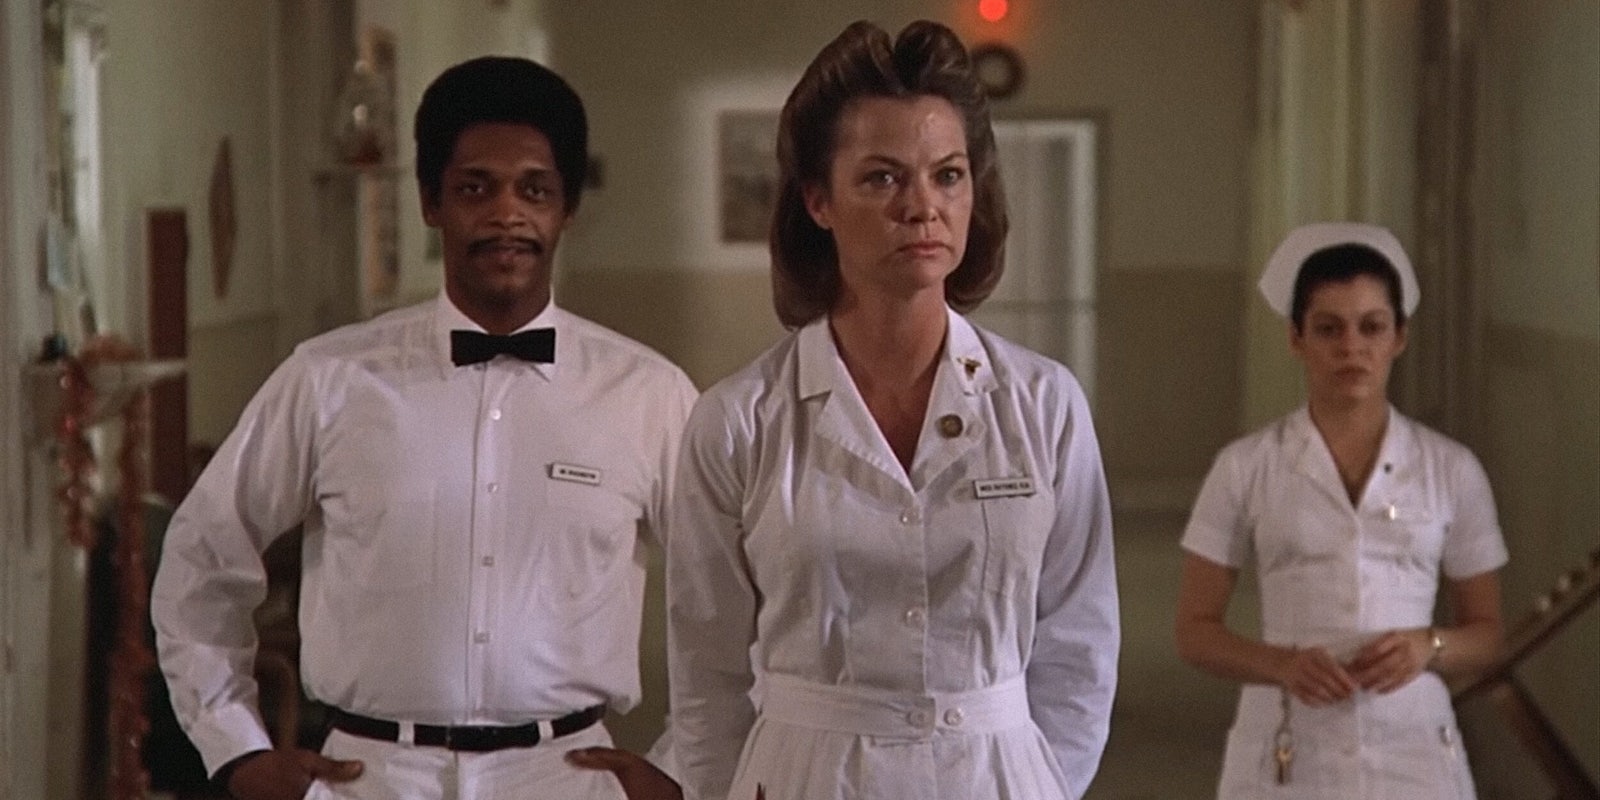 Nurse Ratched and staff from One Flew Over The Cuckoos Nest